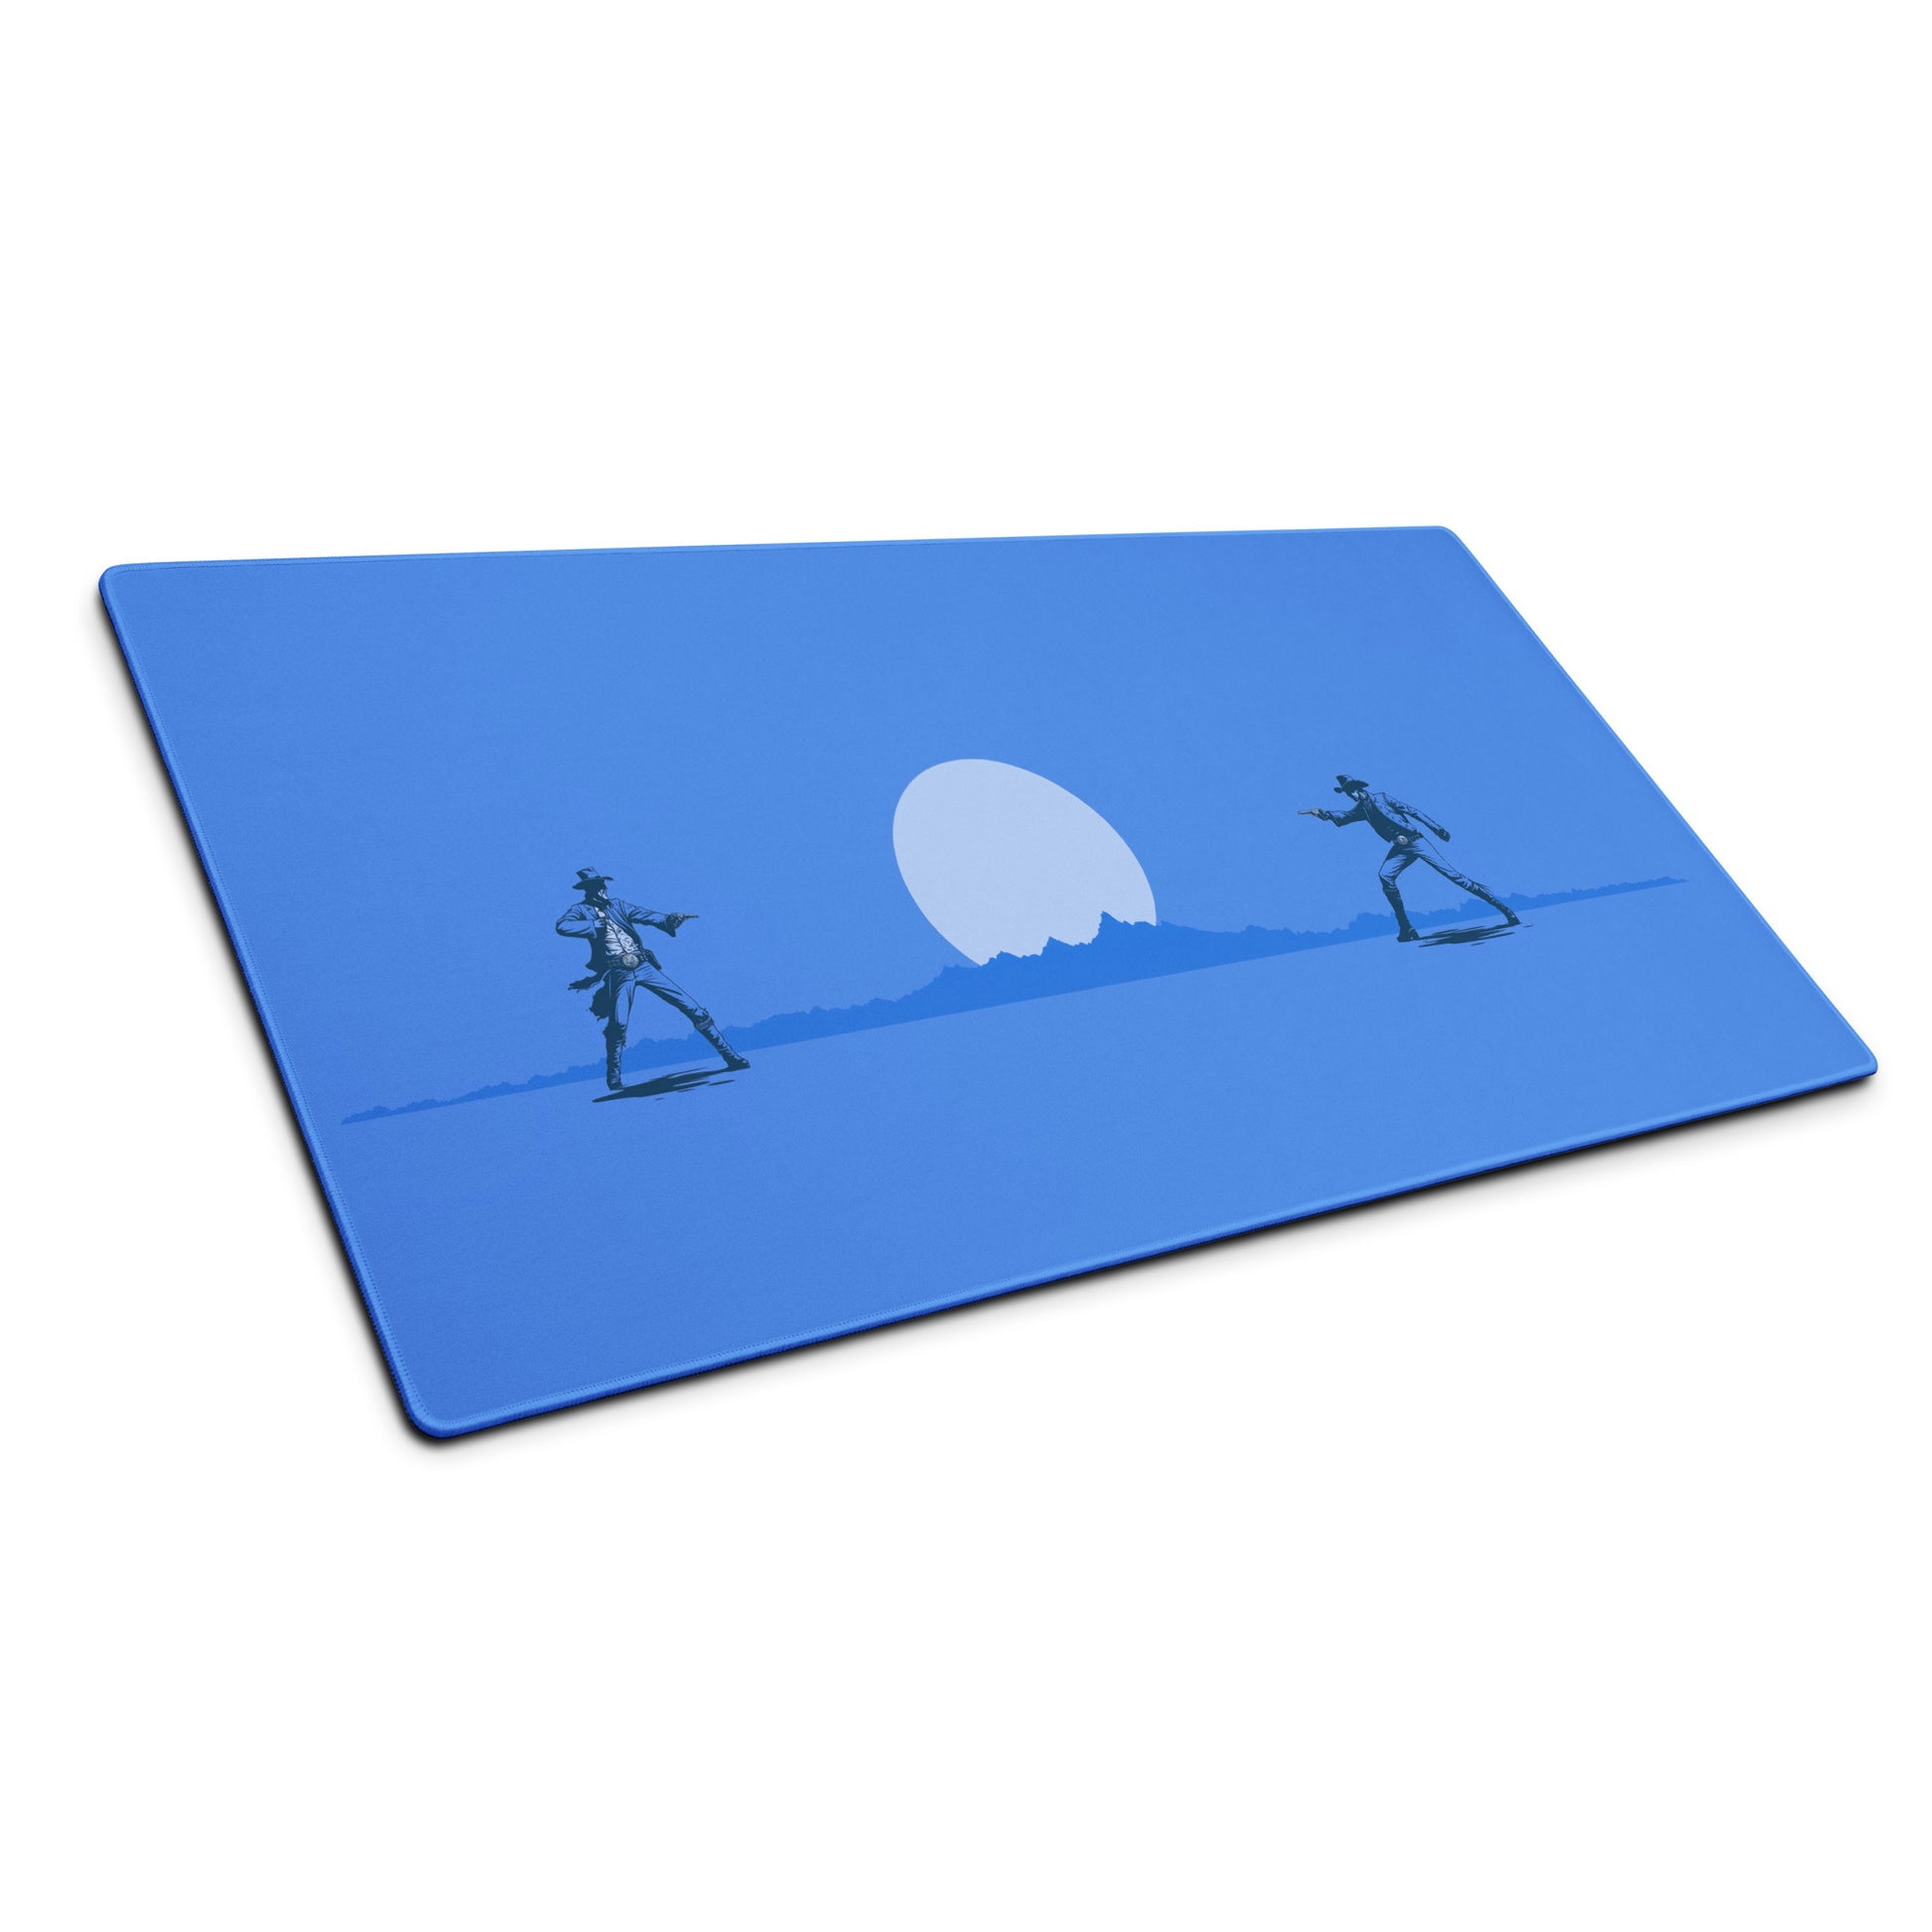 A blue 36" x 18" desk pad with two cowboys dueling sitting at an angle